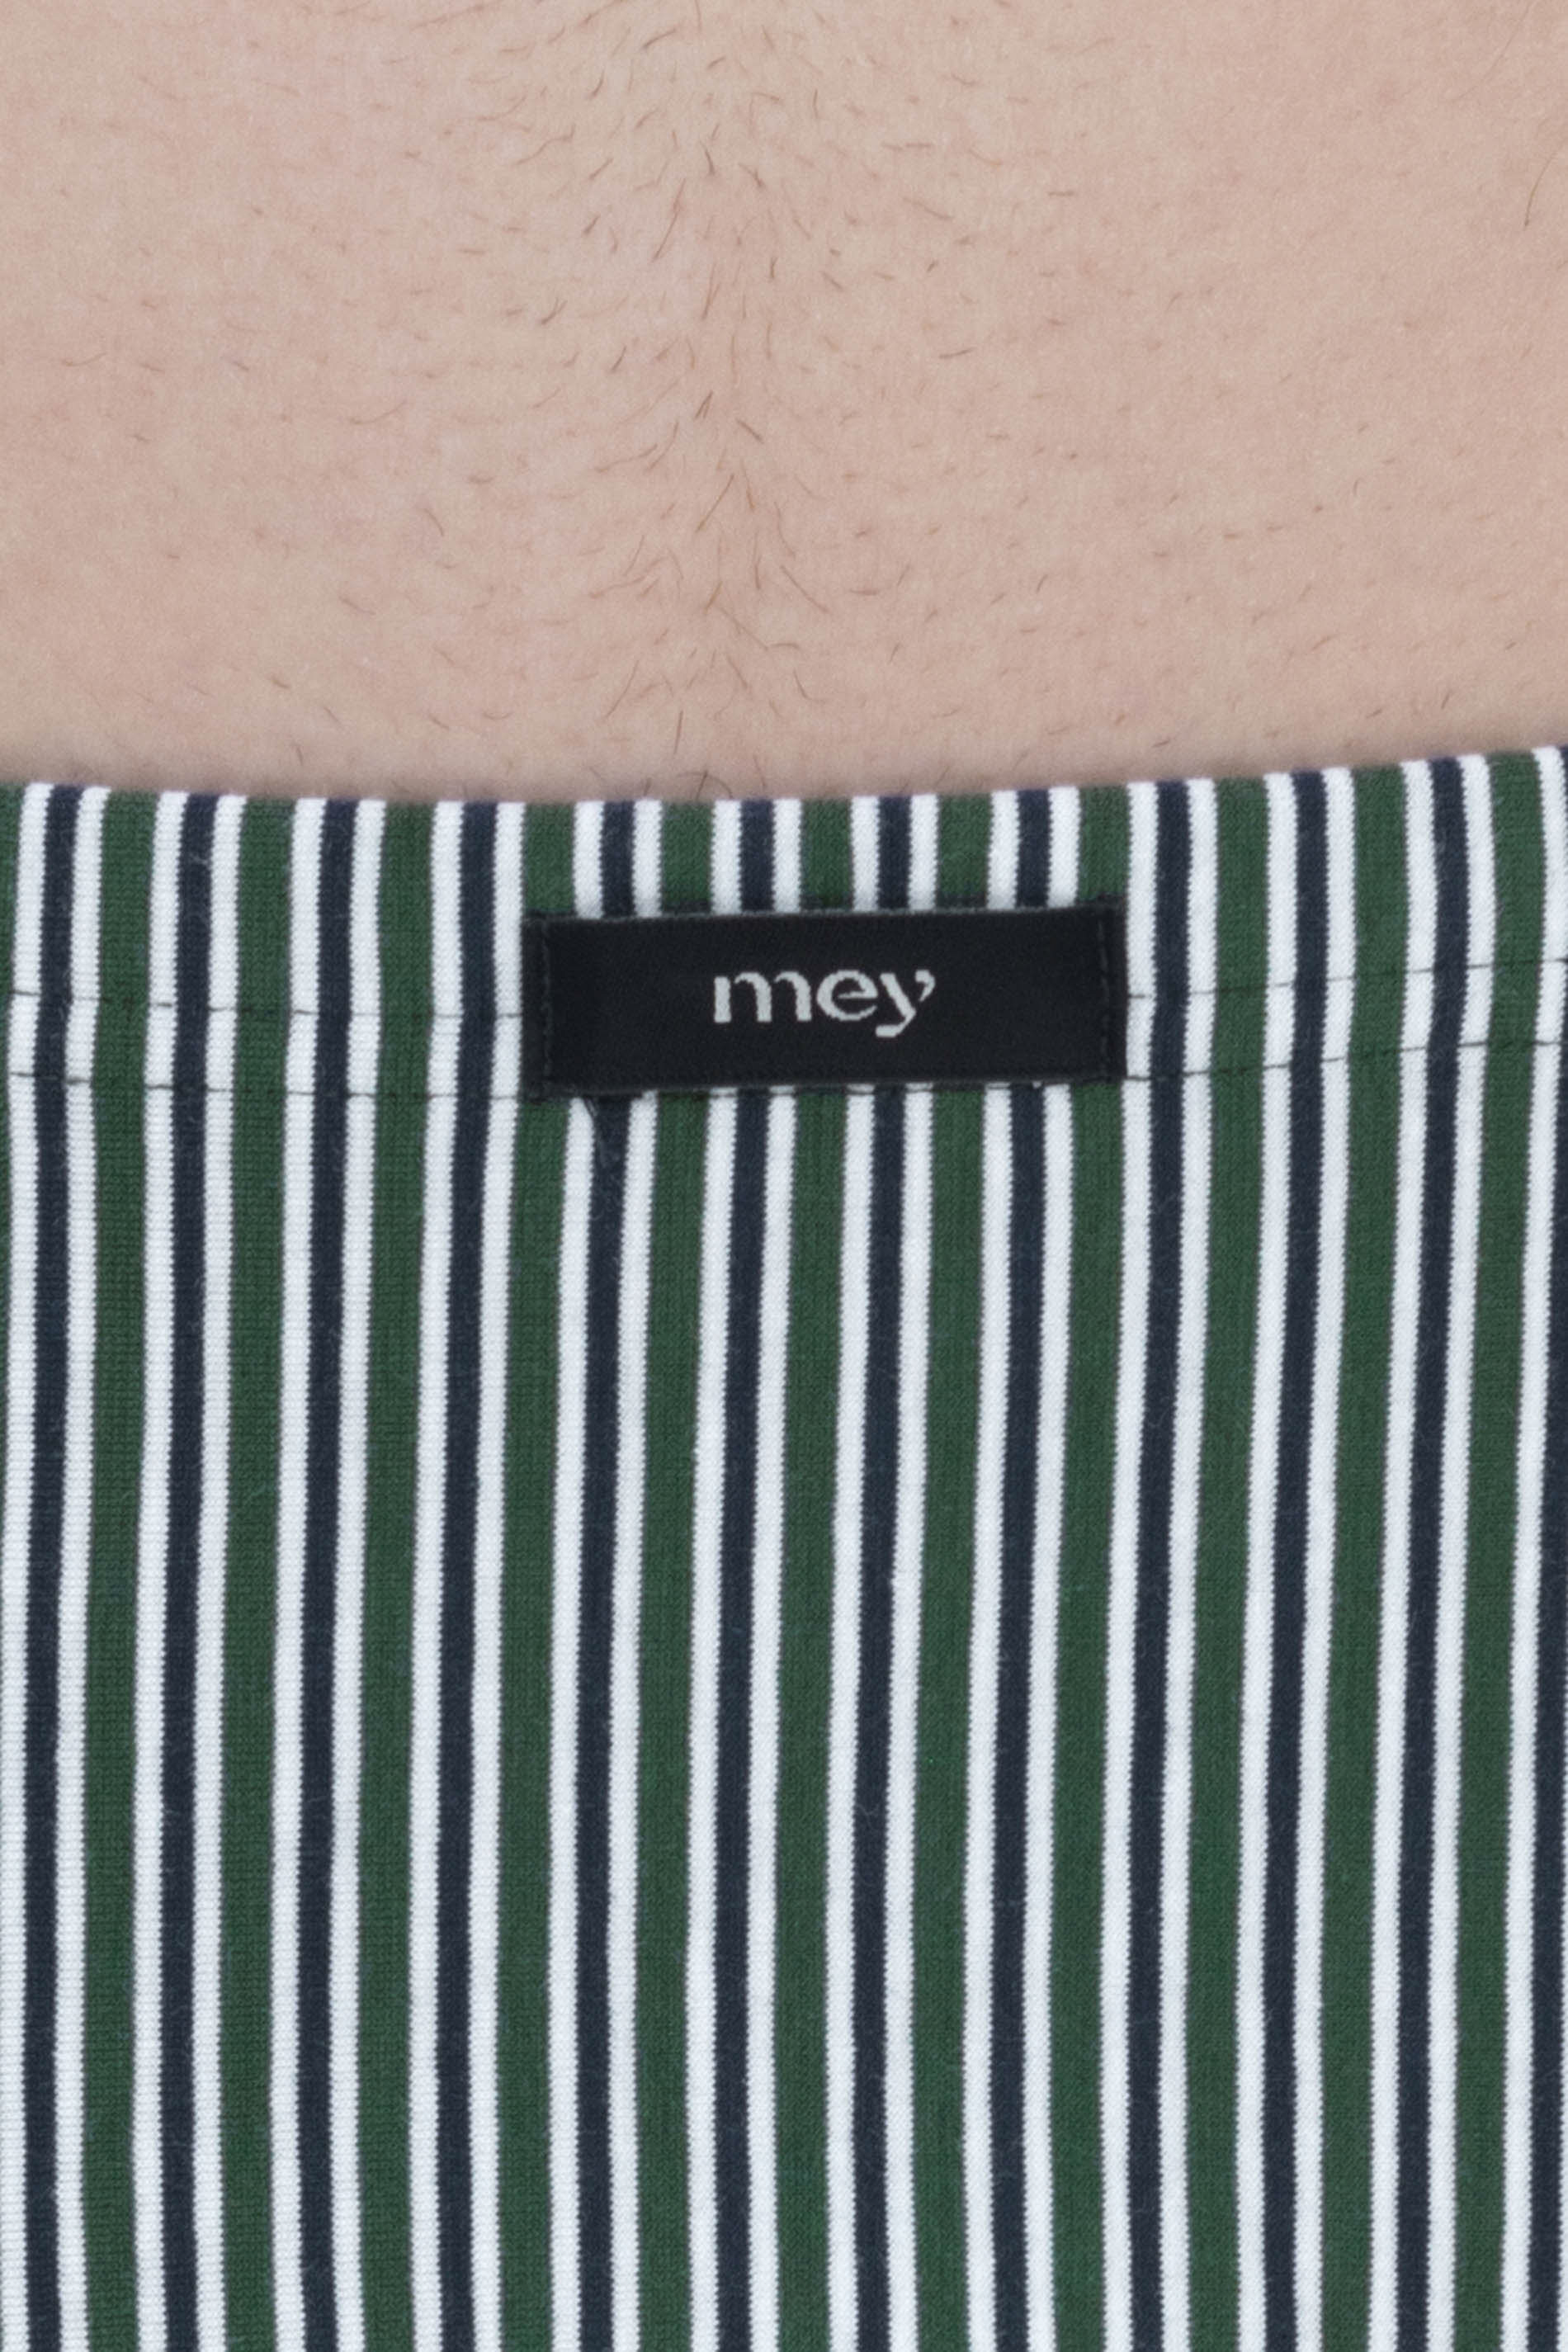 Shorty Evergreen Serie 3 Col Stripes Detail View 01 | mey®